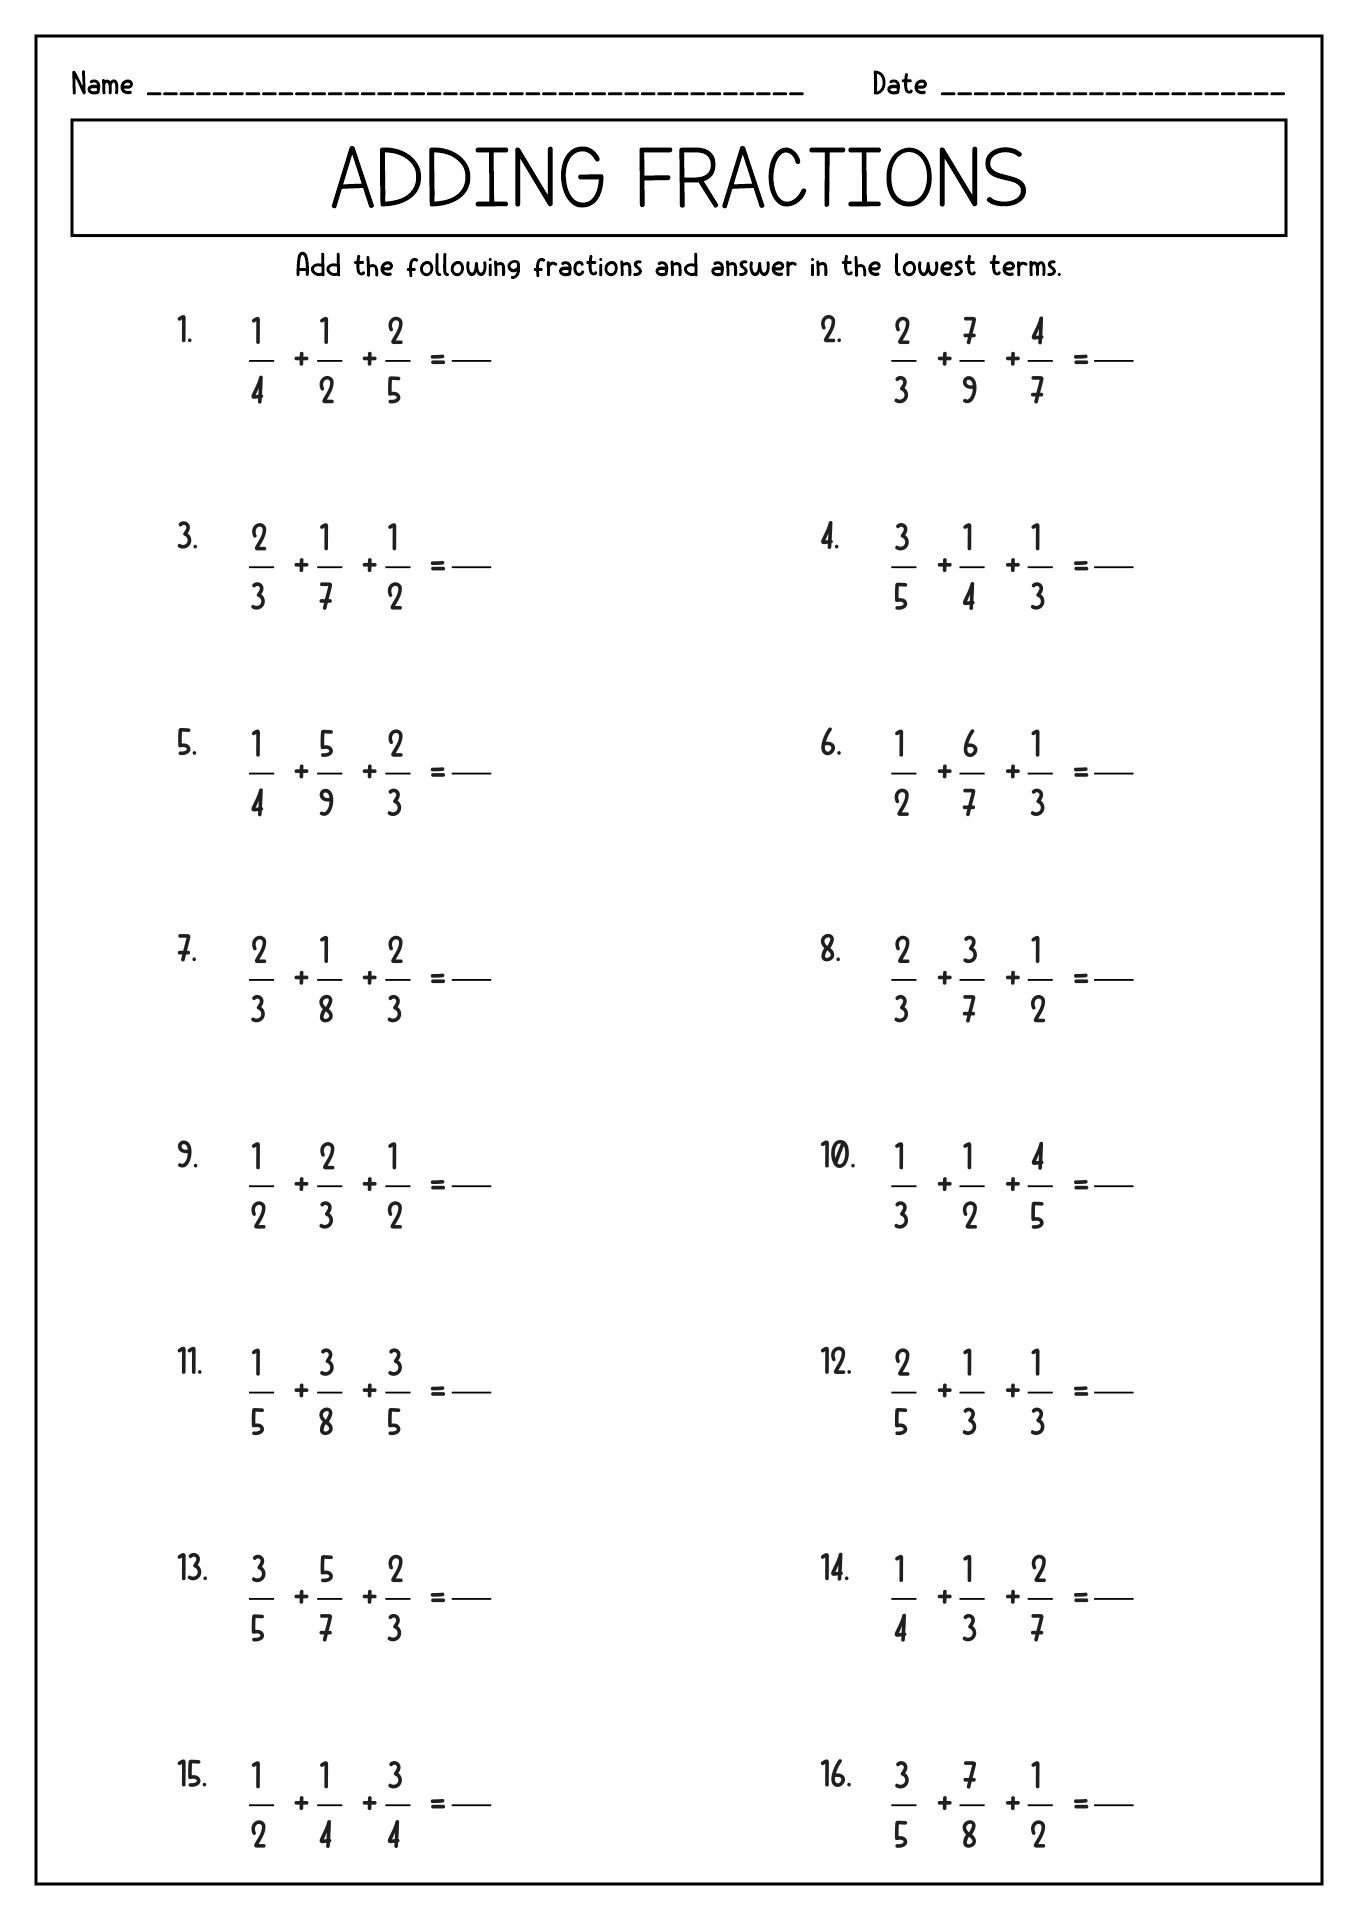 Year 6 Maths Geometric Questions Year 6 Maths SATS QUESTIONS 2 20 Grouped Topics Here